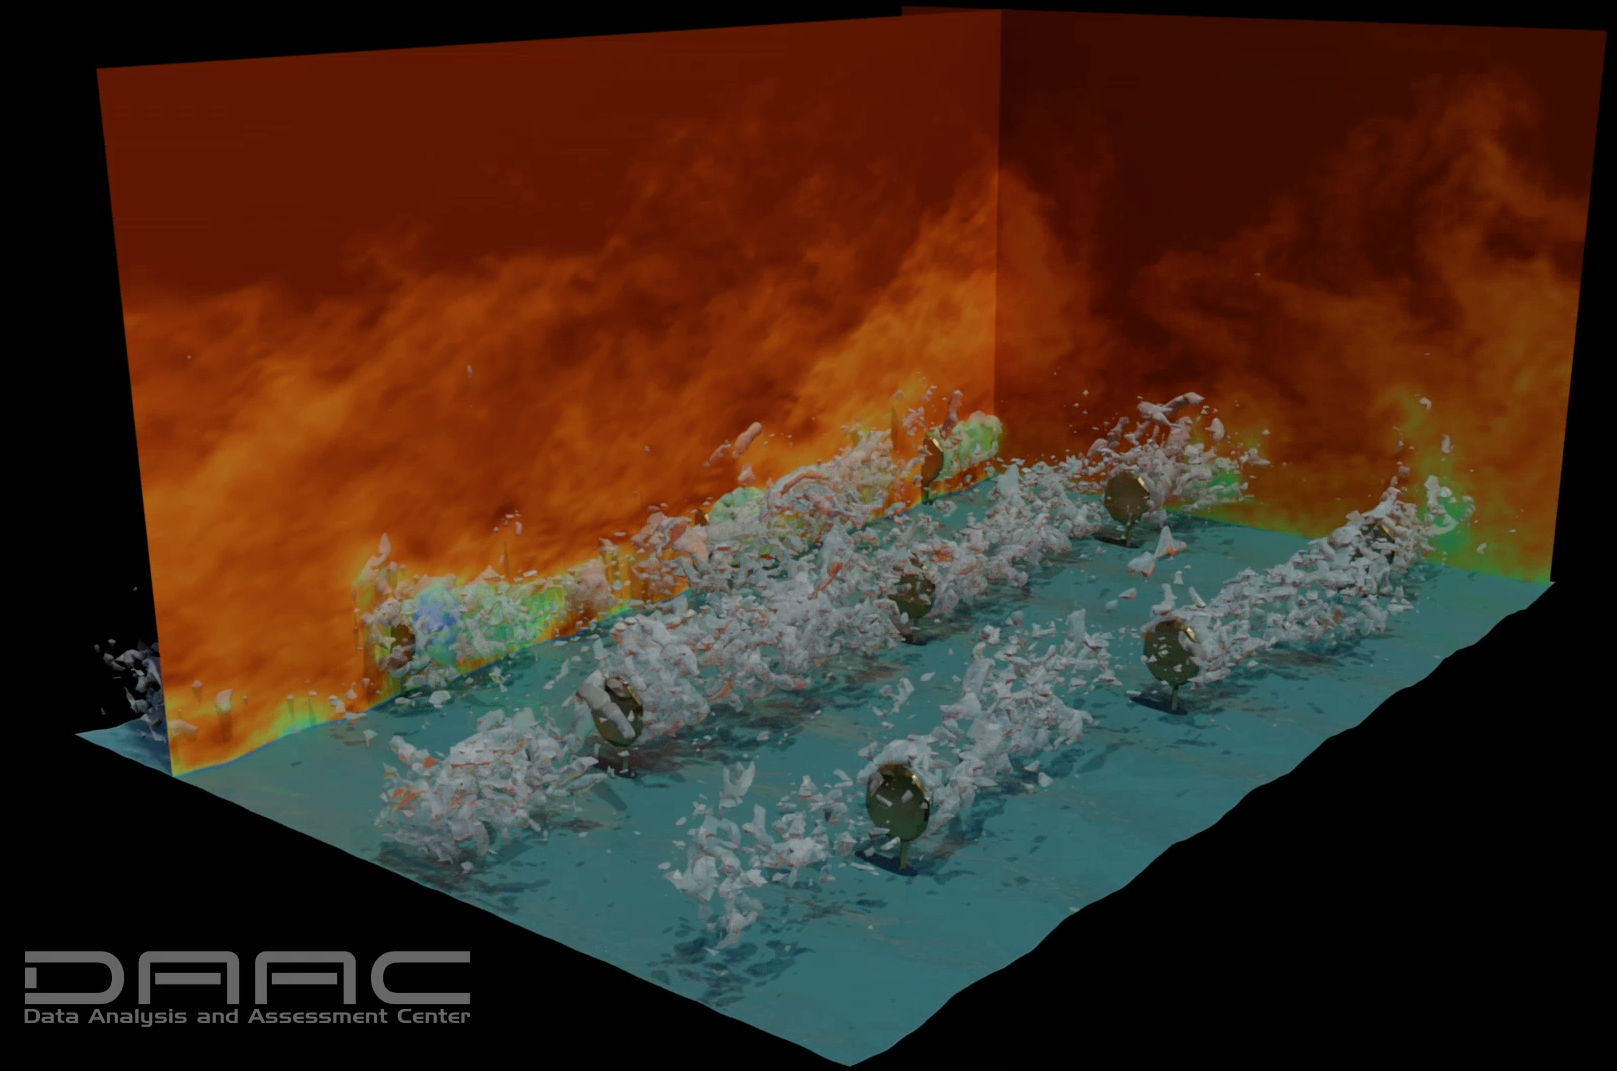 Large-eddy simulation result of wind turbulence field in a floating offshore wind farm.  In the simulation, the wind turbines are modeled using the actuator disk model.